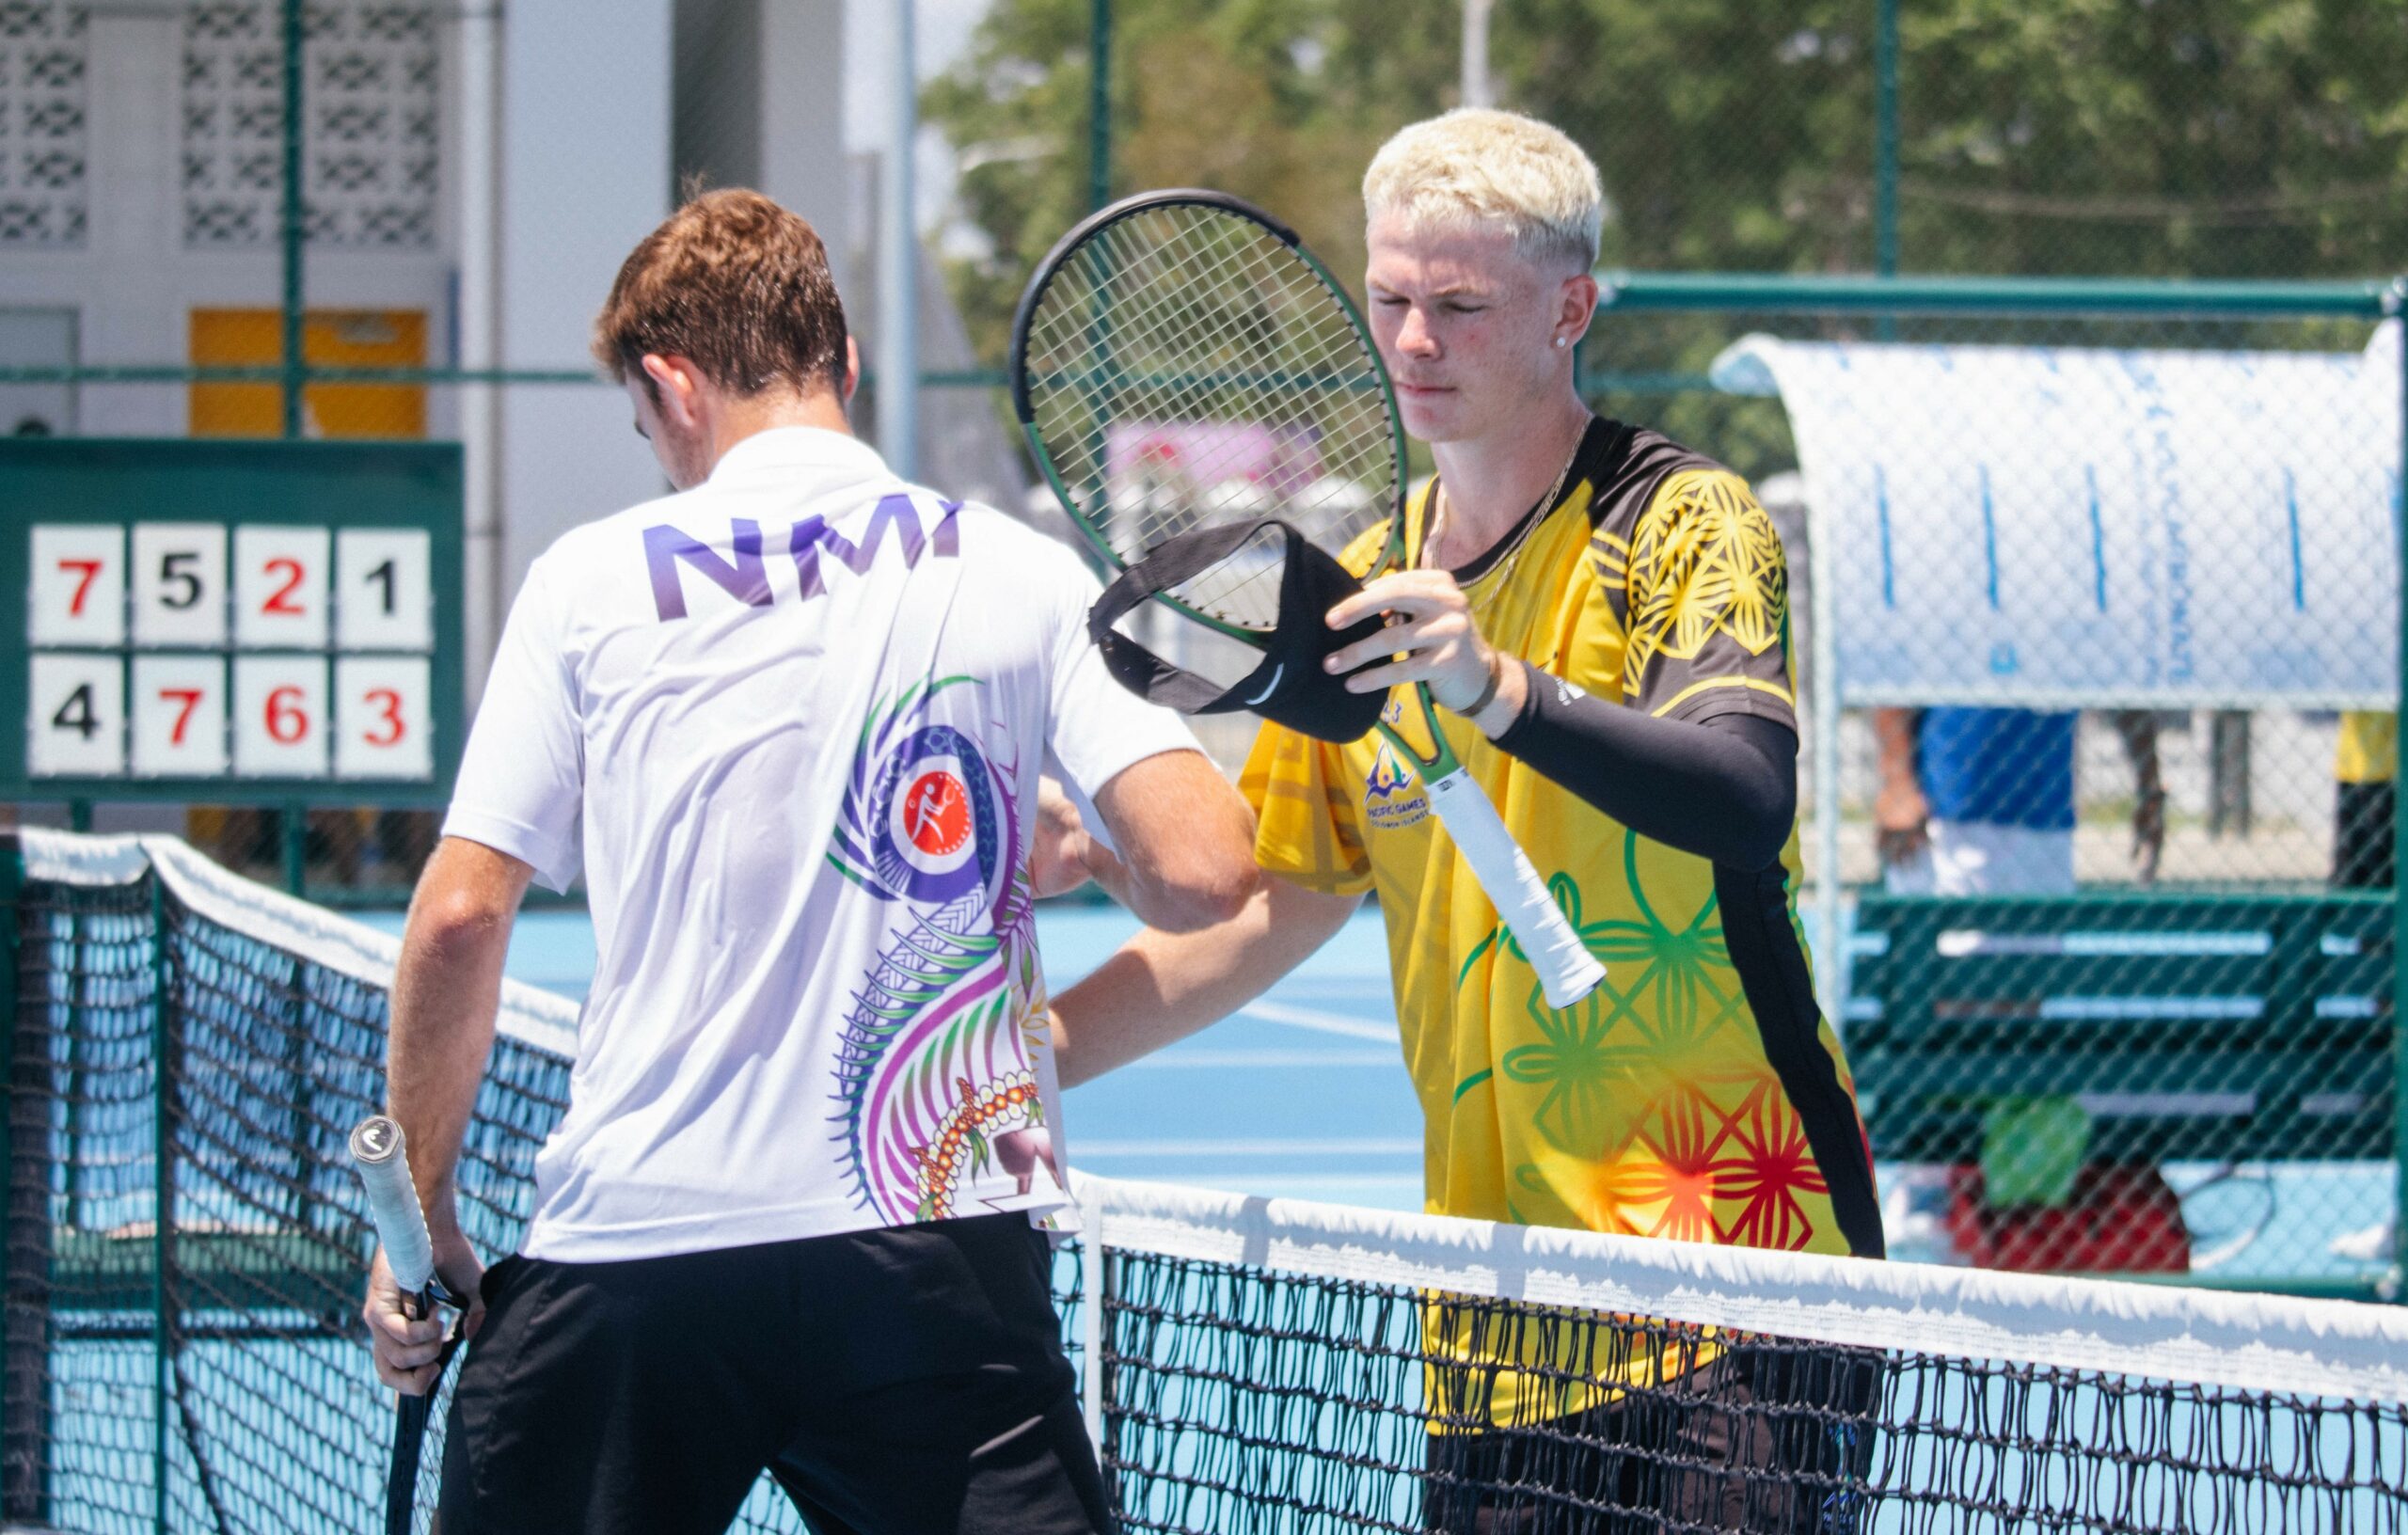 Two male tennis players shaking hands